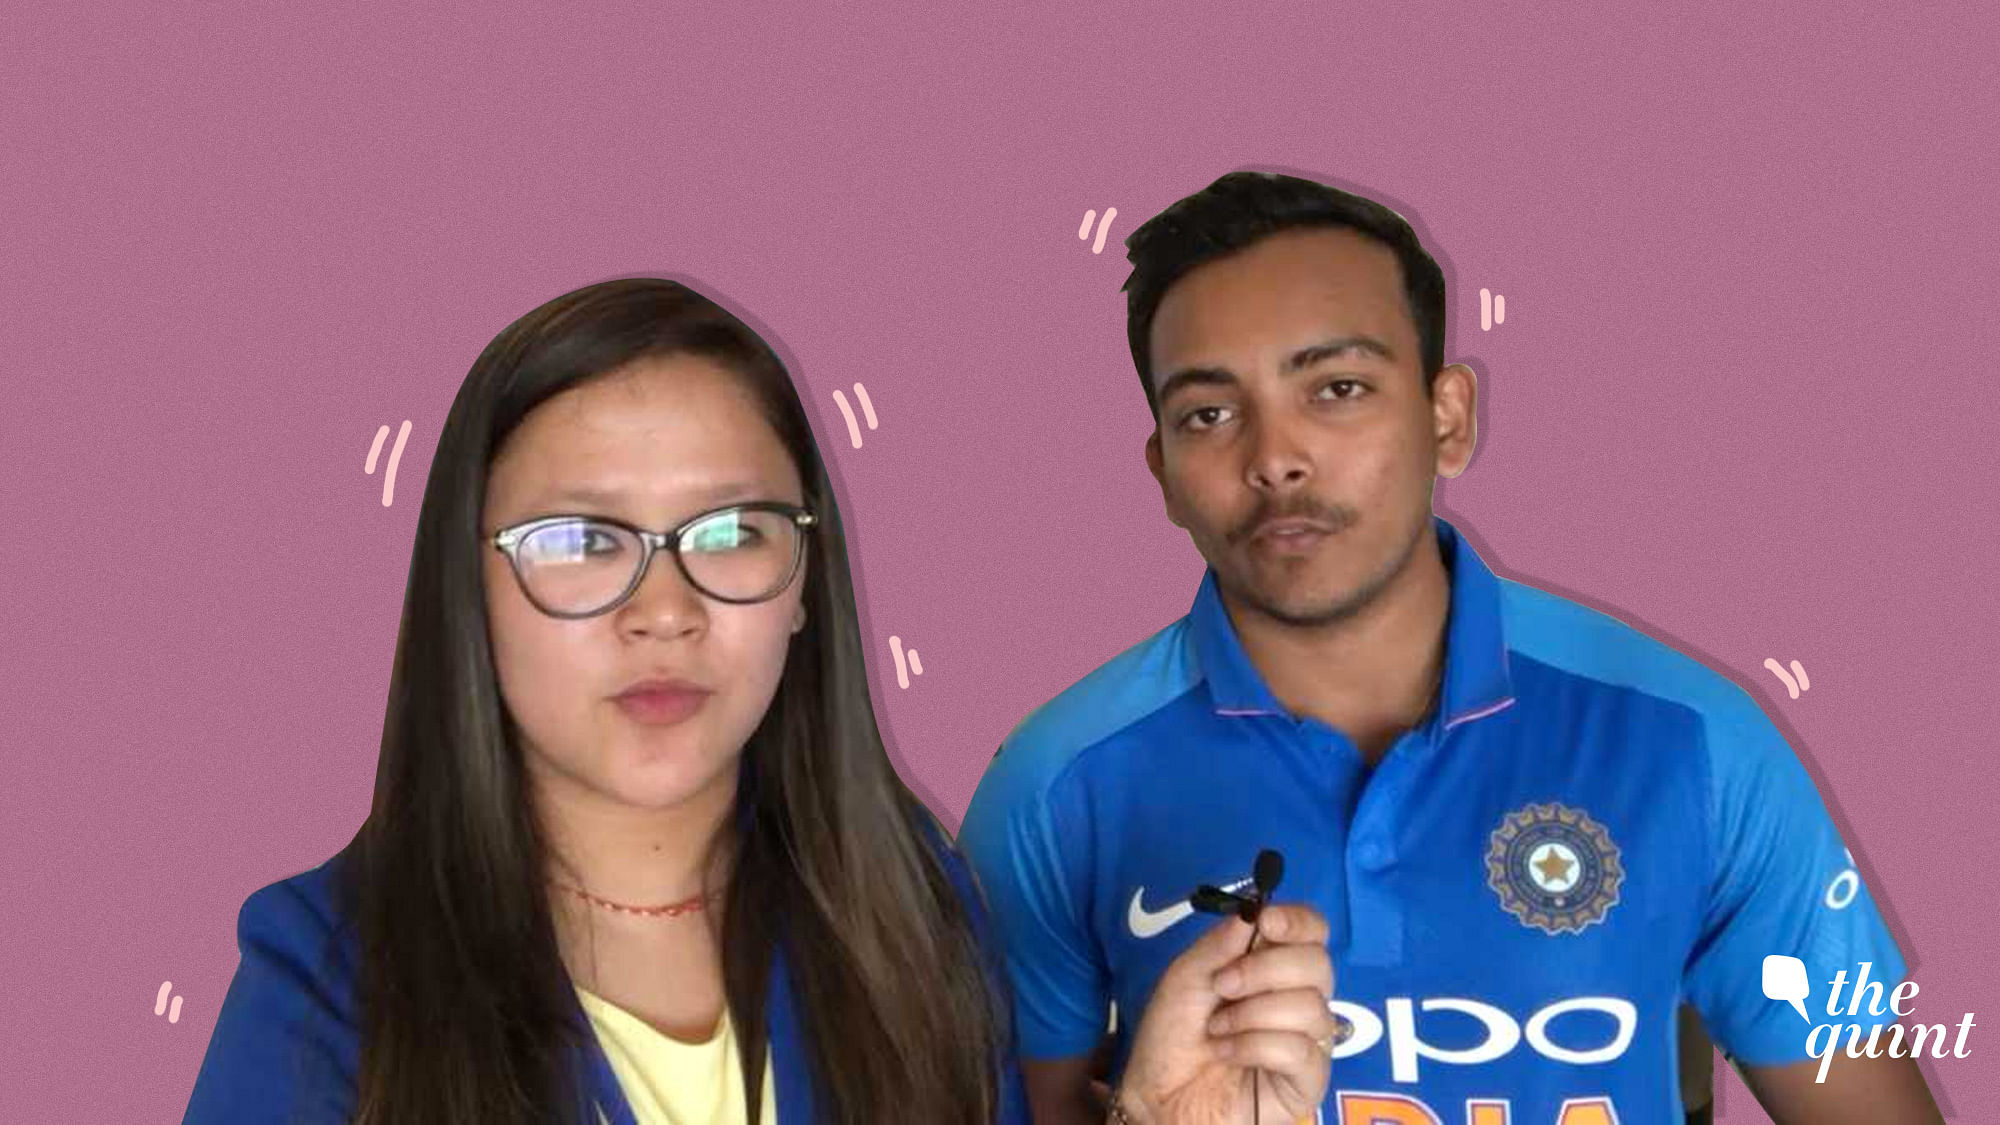 Indian cricketer Prithvi Shaw spoke to The Quint on the sidelines of the launch of the Indian jersey for the 2019 World Cup this summer.